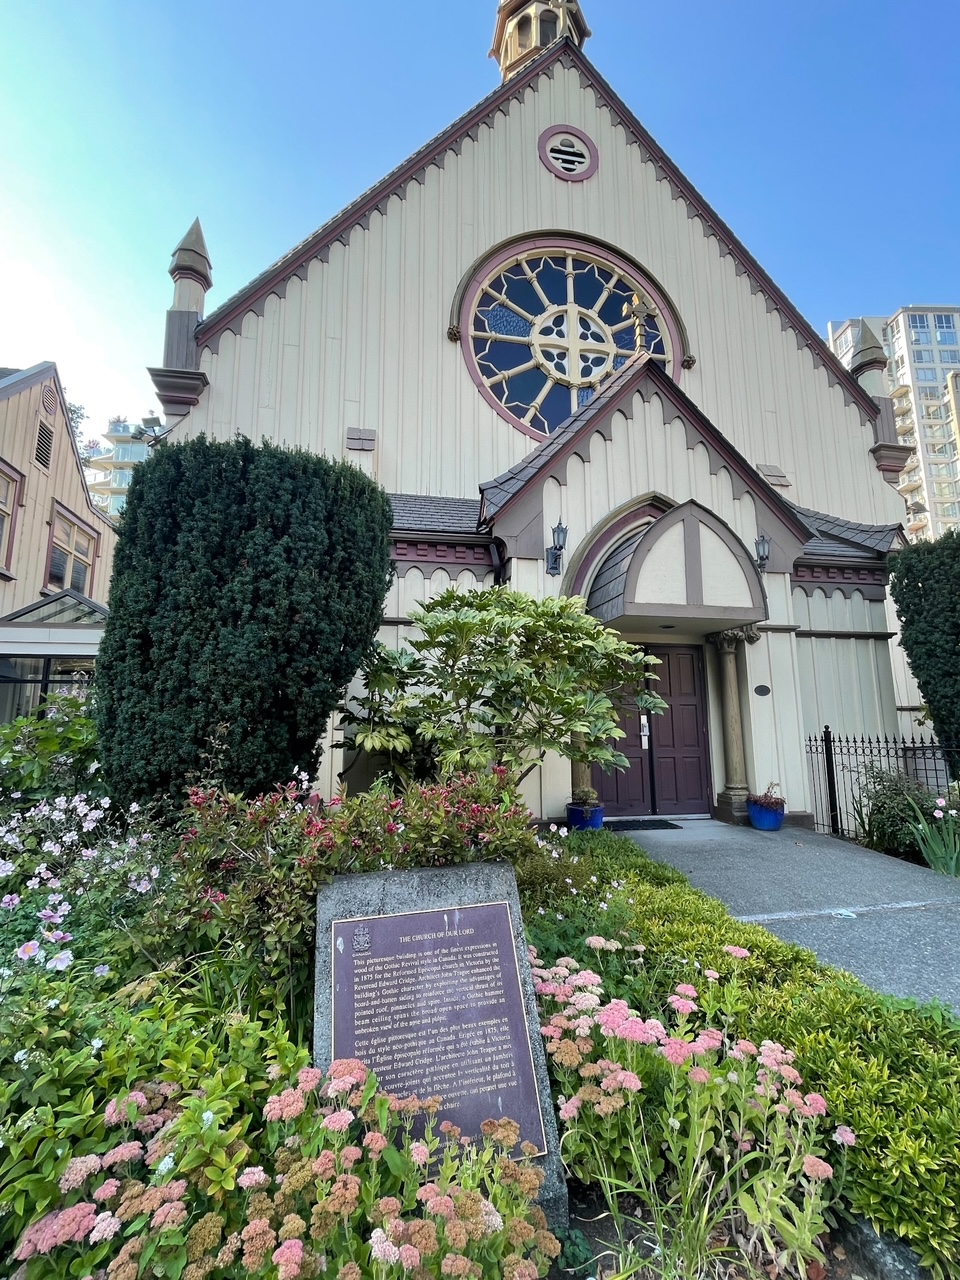 One of the churches you can visit in Victoria, BC without a Car